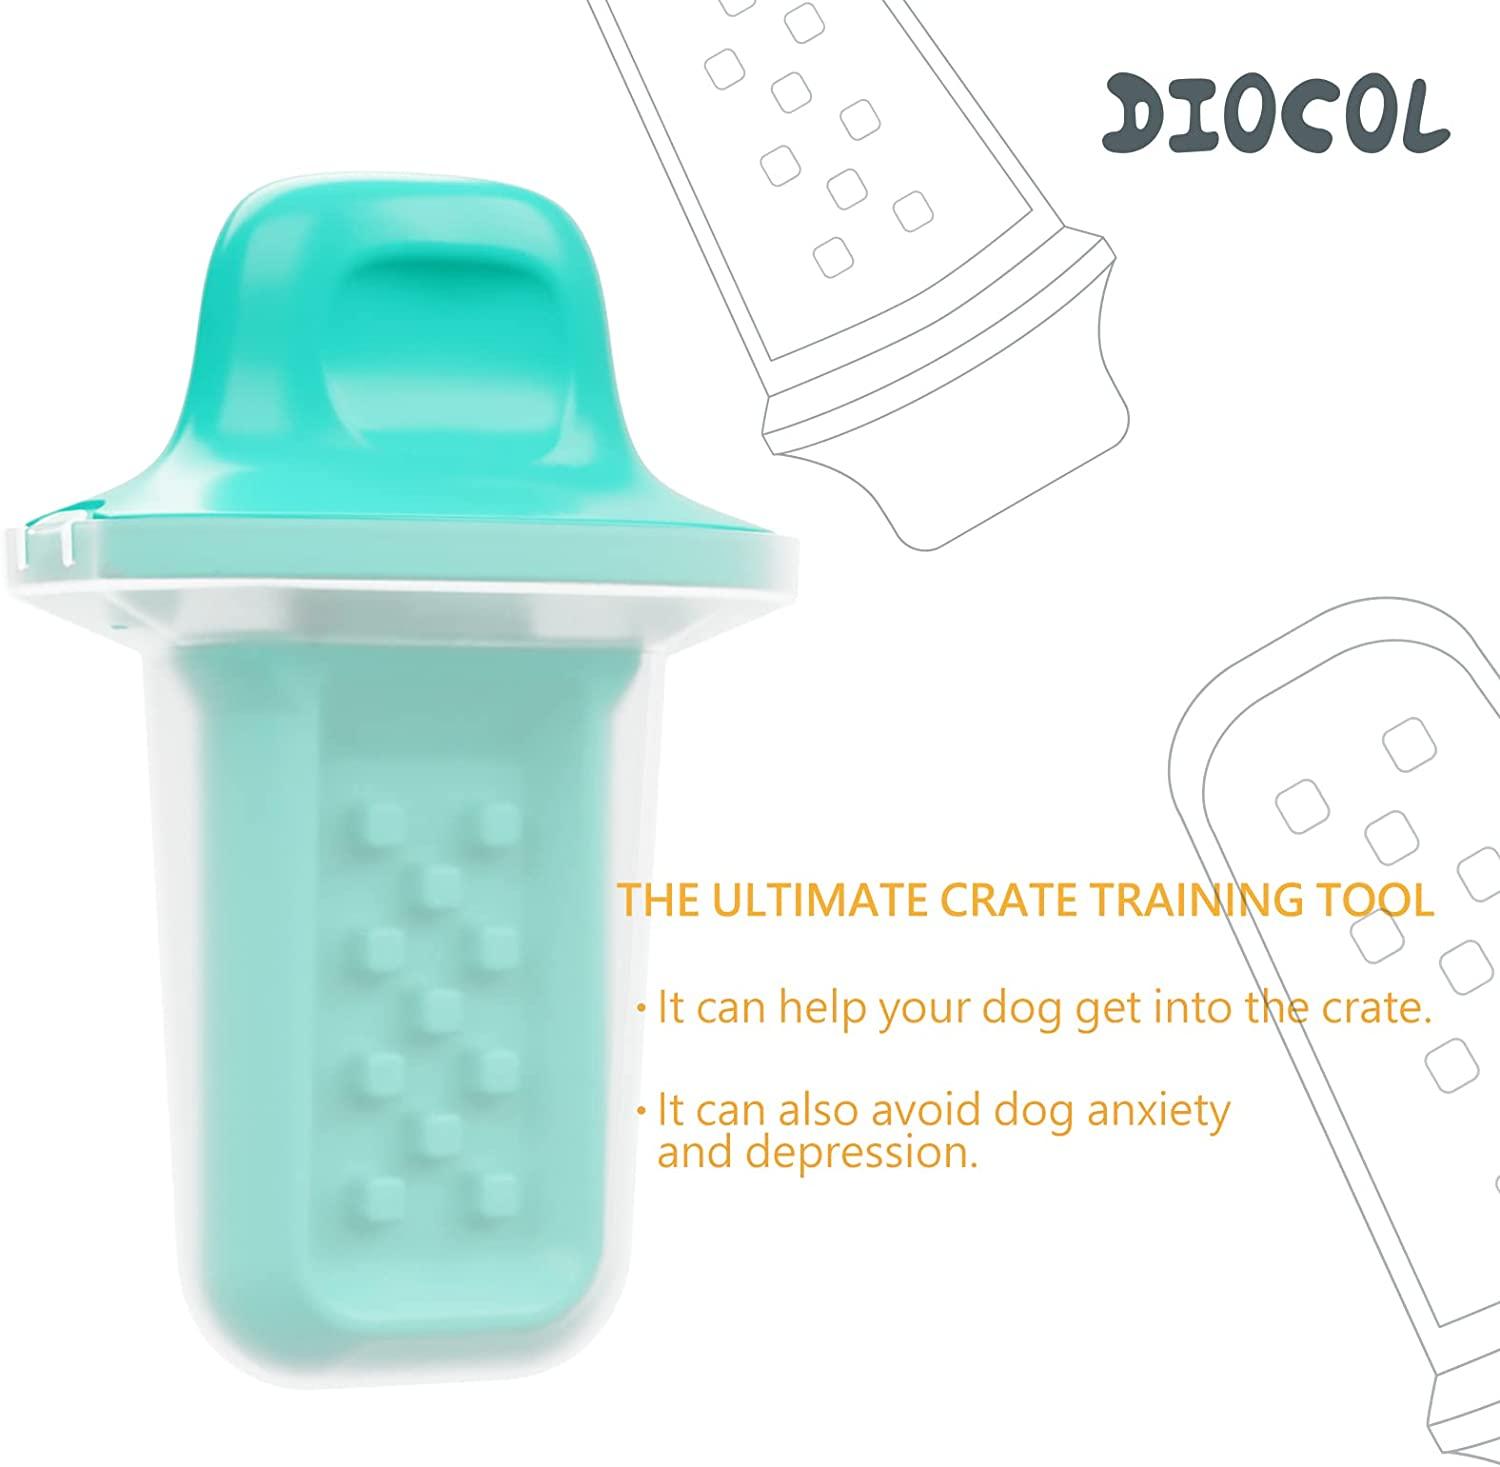 Dog Crate Training Peanut Butter Toy, DIOCOL GREEN NEW